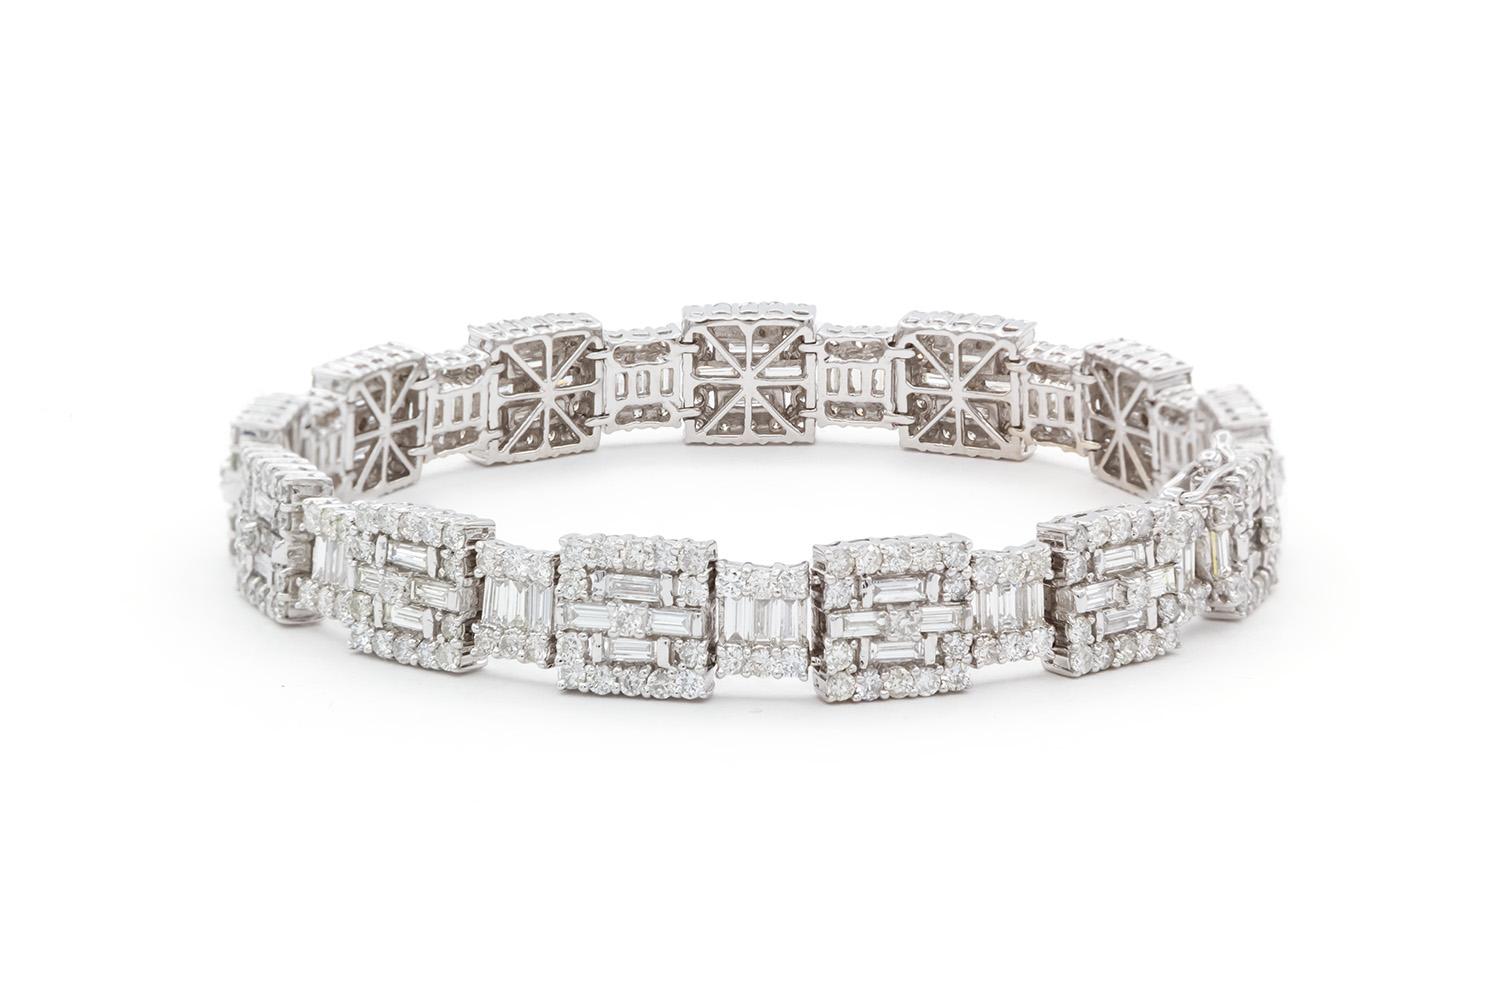 18k White Gold Diamond Contemporary Baguette Diamond Tennis Line Bracelet 8.38ct In Excellent Condition For Sale In Tustin, CA